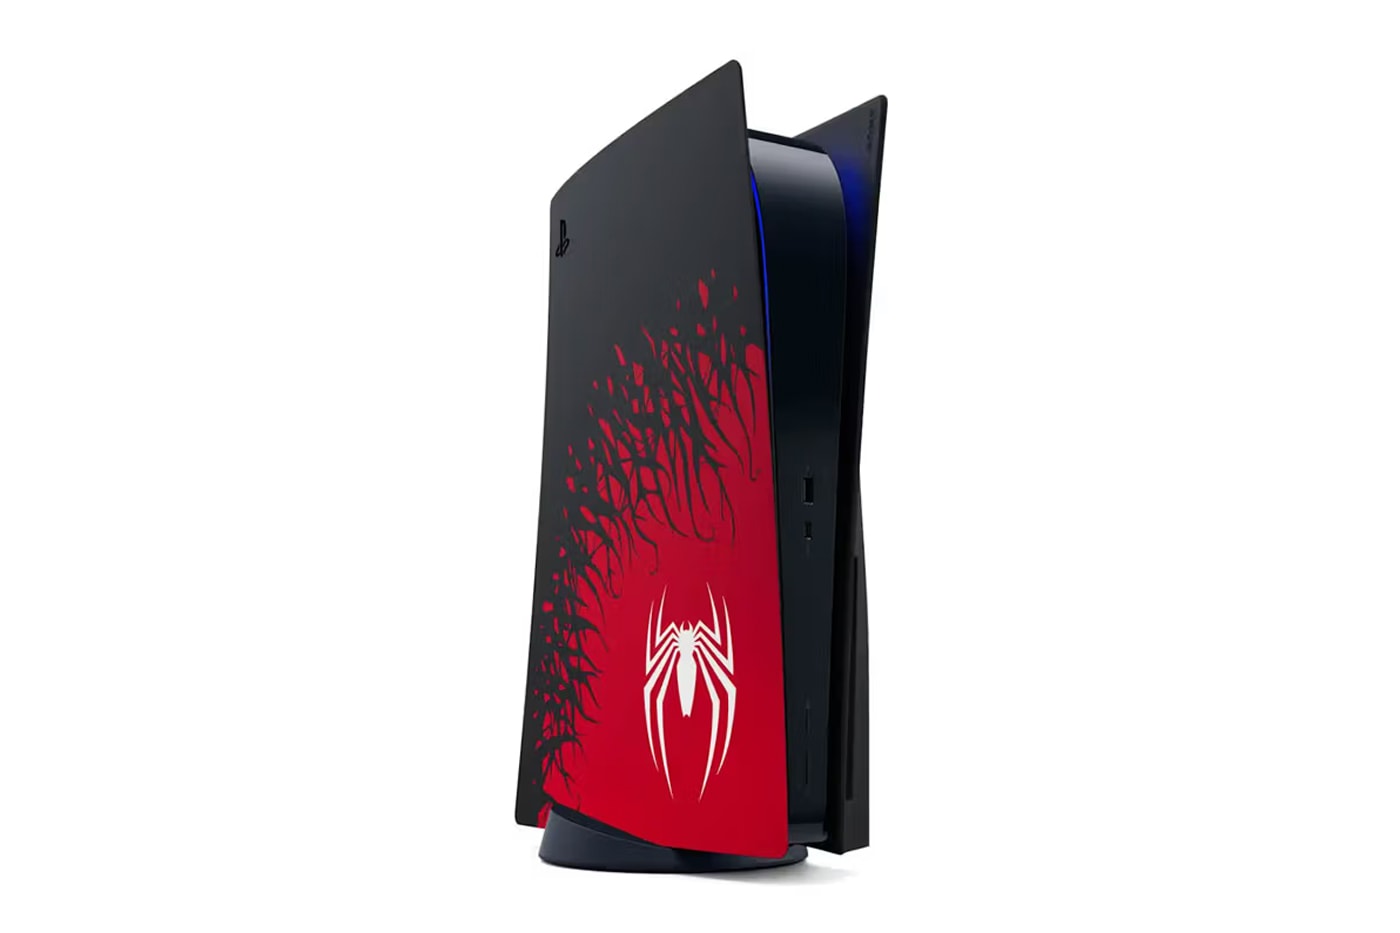 PS5 Marvel's Spider-Man 2 Limited Edition DualSense Controller Console